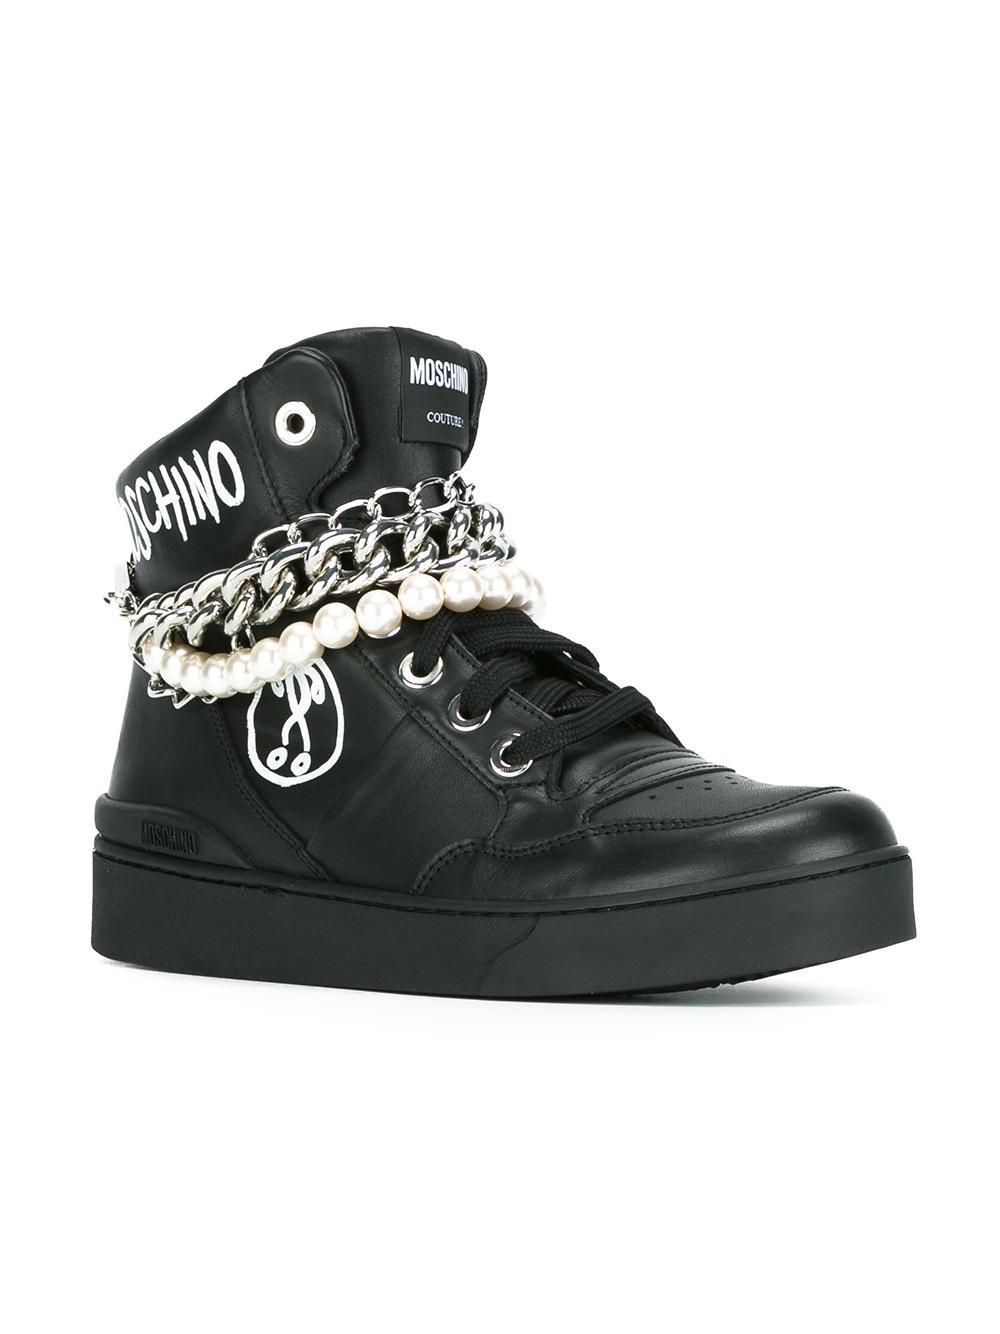 Lyst - Moschino Sneakers in Black for Men